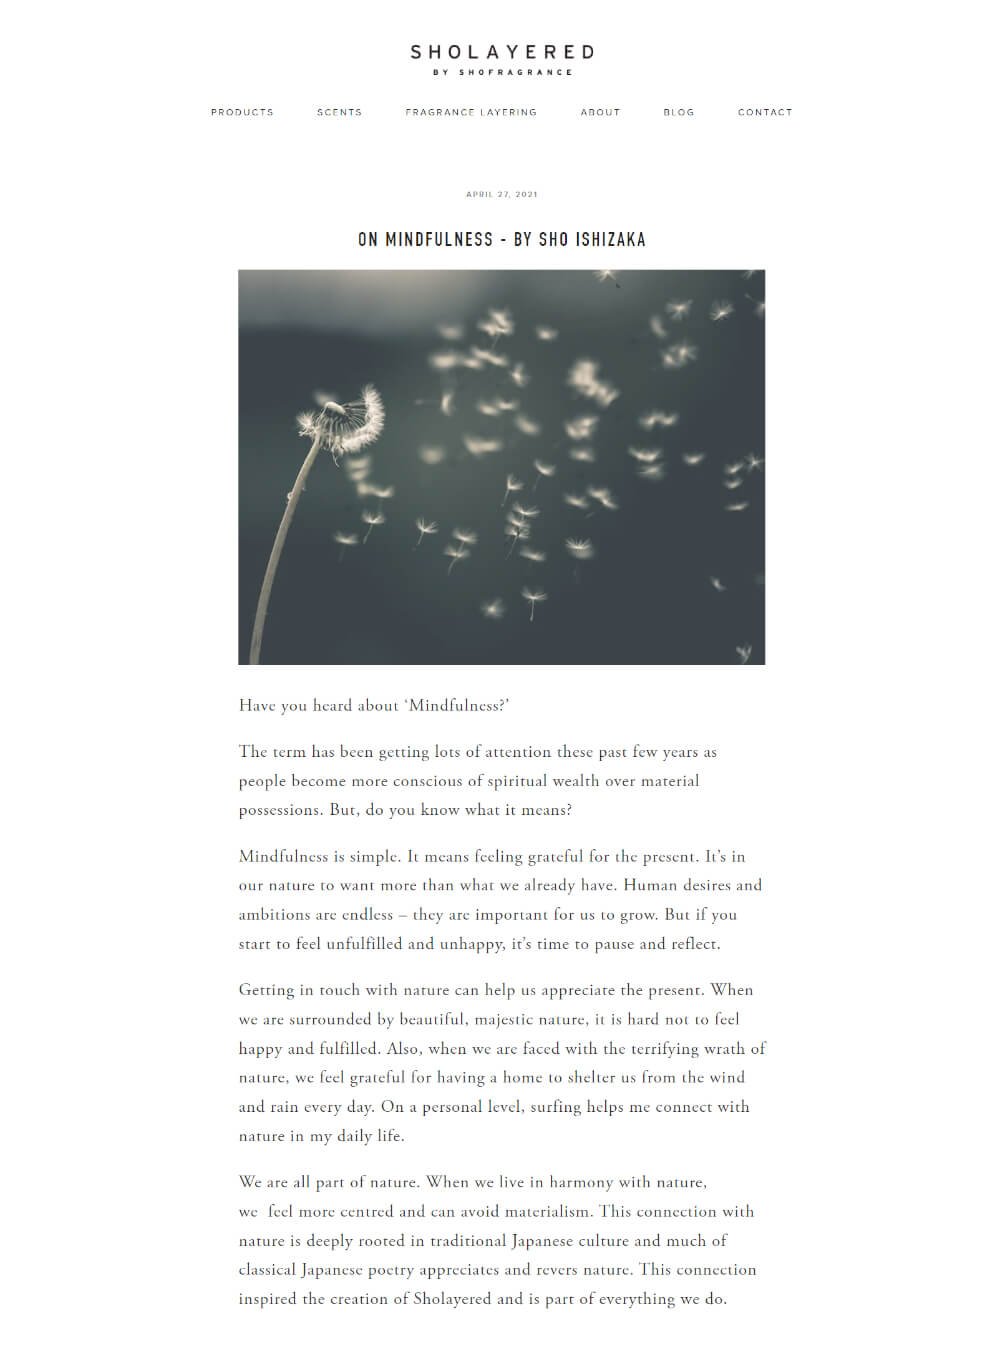 Screenshot of On mindfulness article for Sholayered